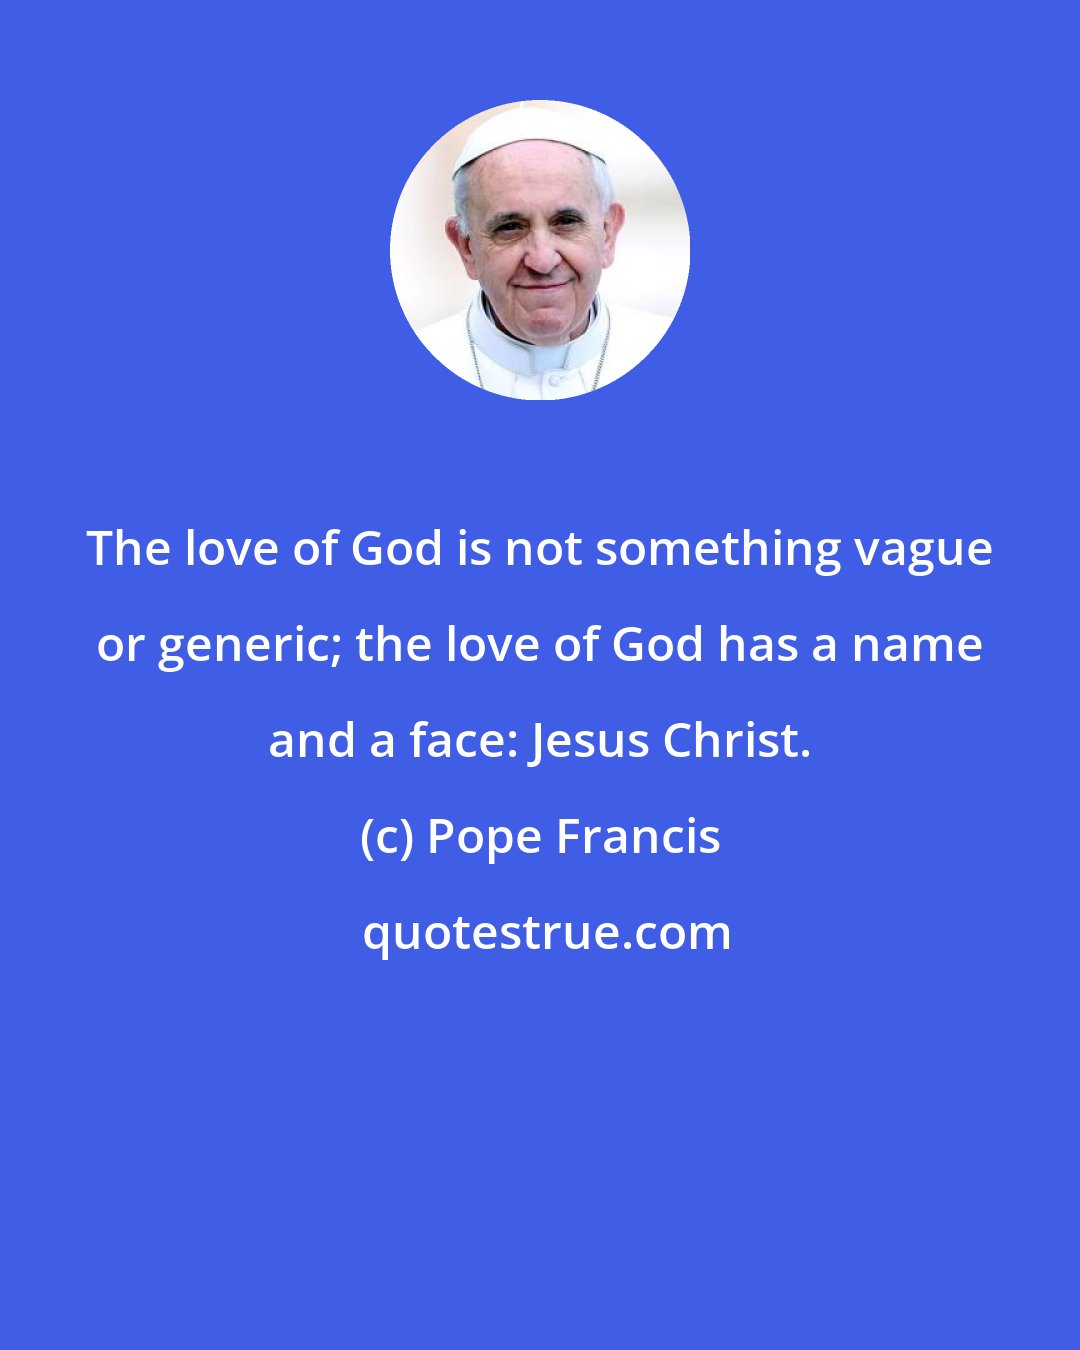 Pope Francis: The love of God is not something vague or generic; the love of God has a name and a face: Jesus Christ.